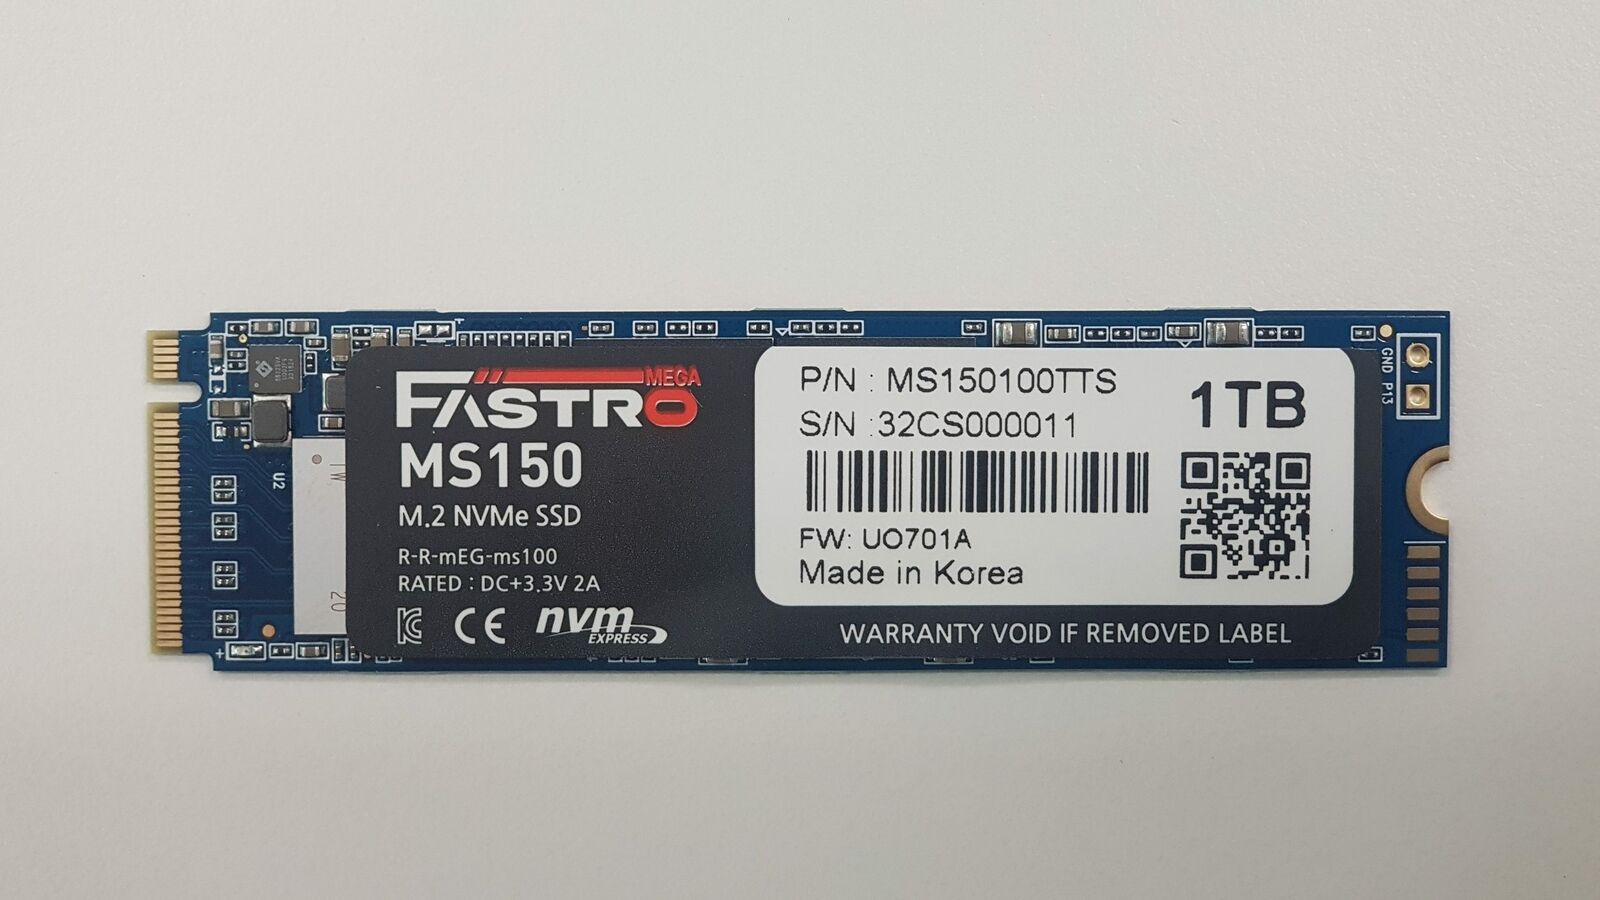 MEGA FASTRO SOLID STATE DRIVE SSD 1TB M.2 NVME MS150100TTS